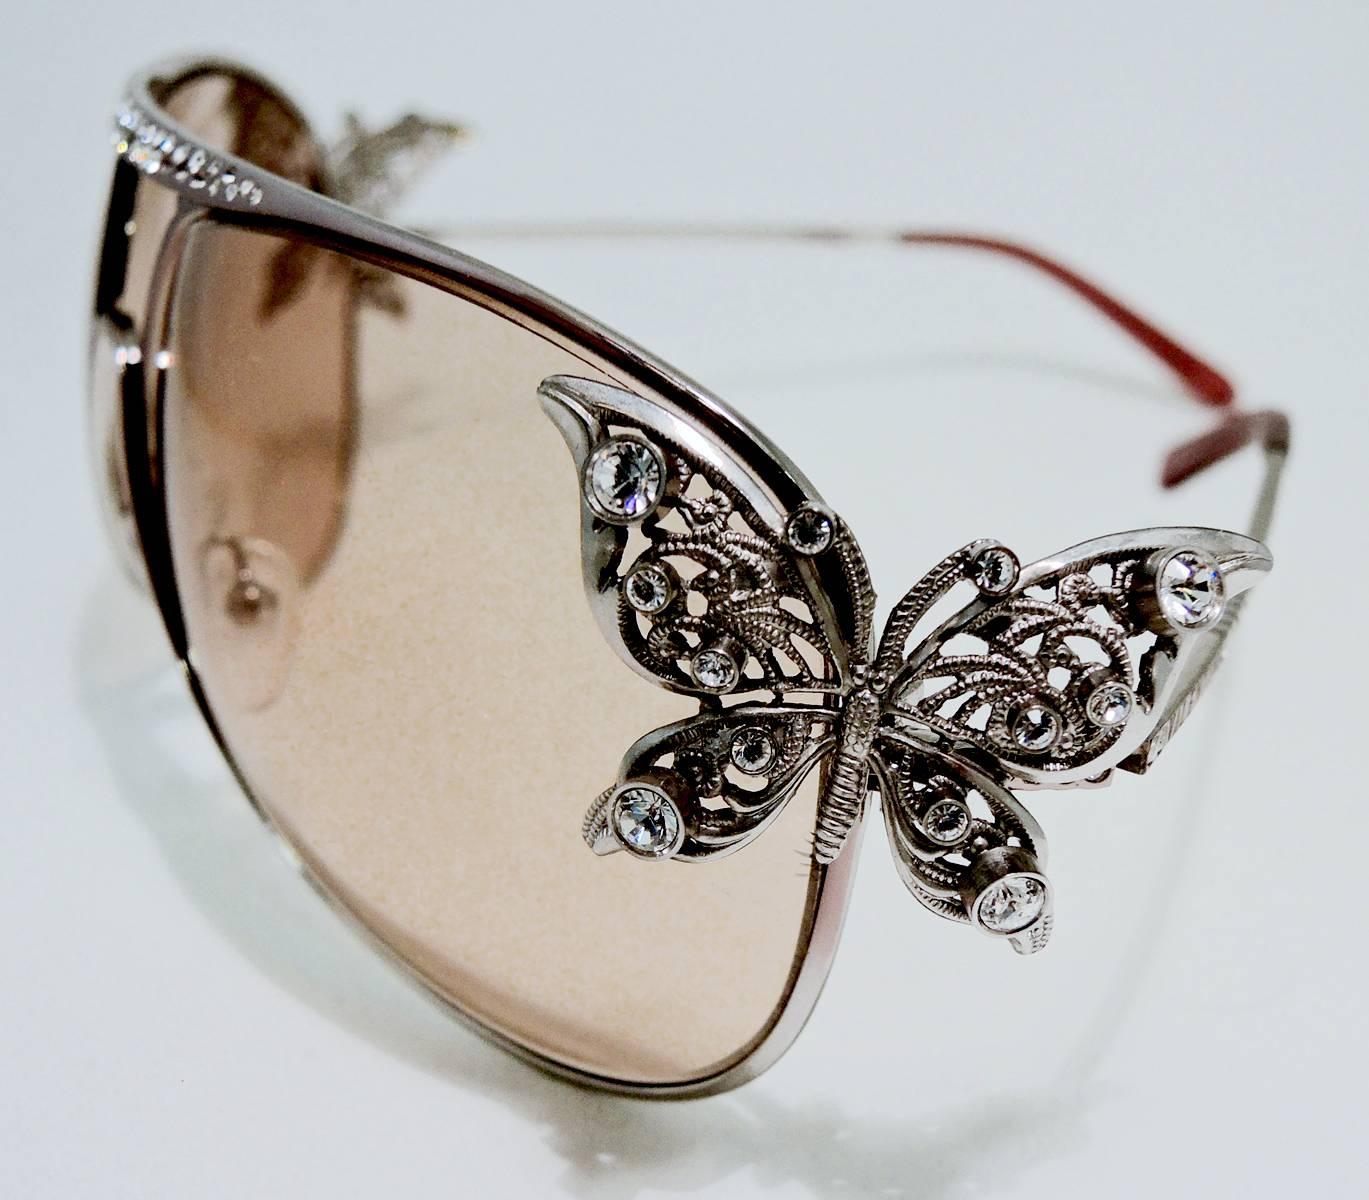 These vintage Valentino sunglasses have their original lenses and have pave crystals in the front. There is a butterfly on each side. They have light pink tint lenses and are a silver tone color. They measure 6” x 2-1/8”, are signed “Valentino” and